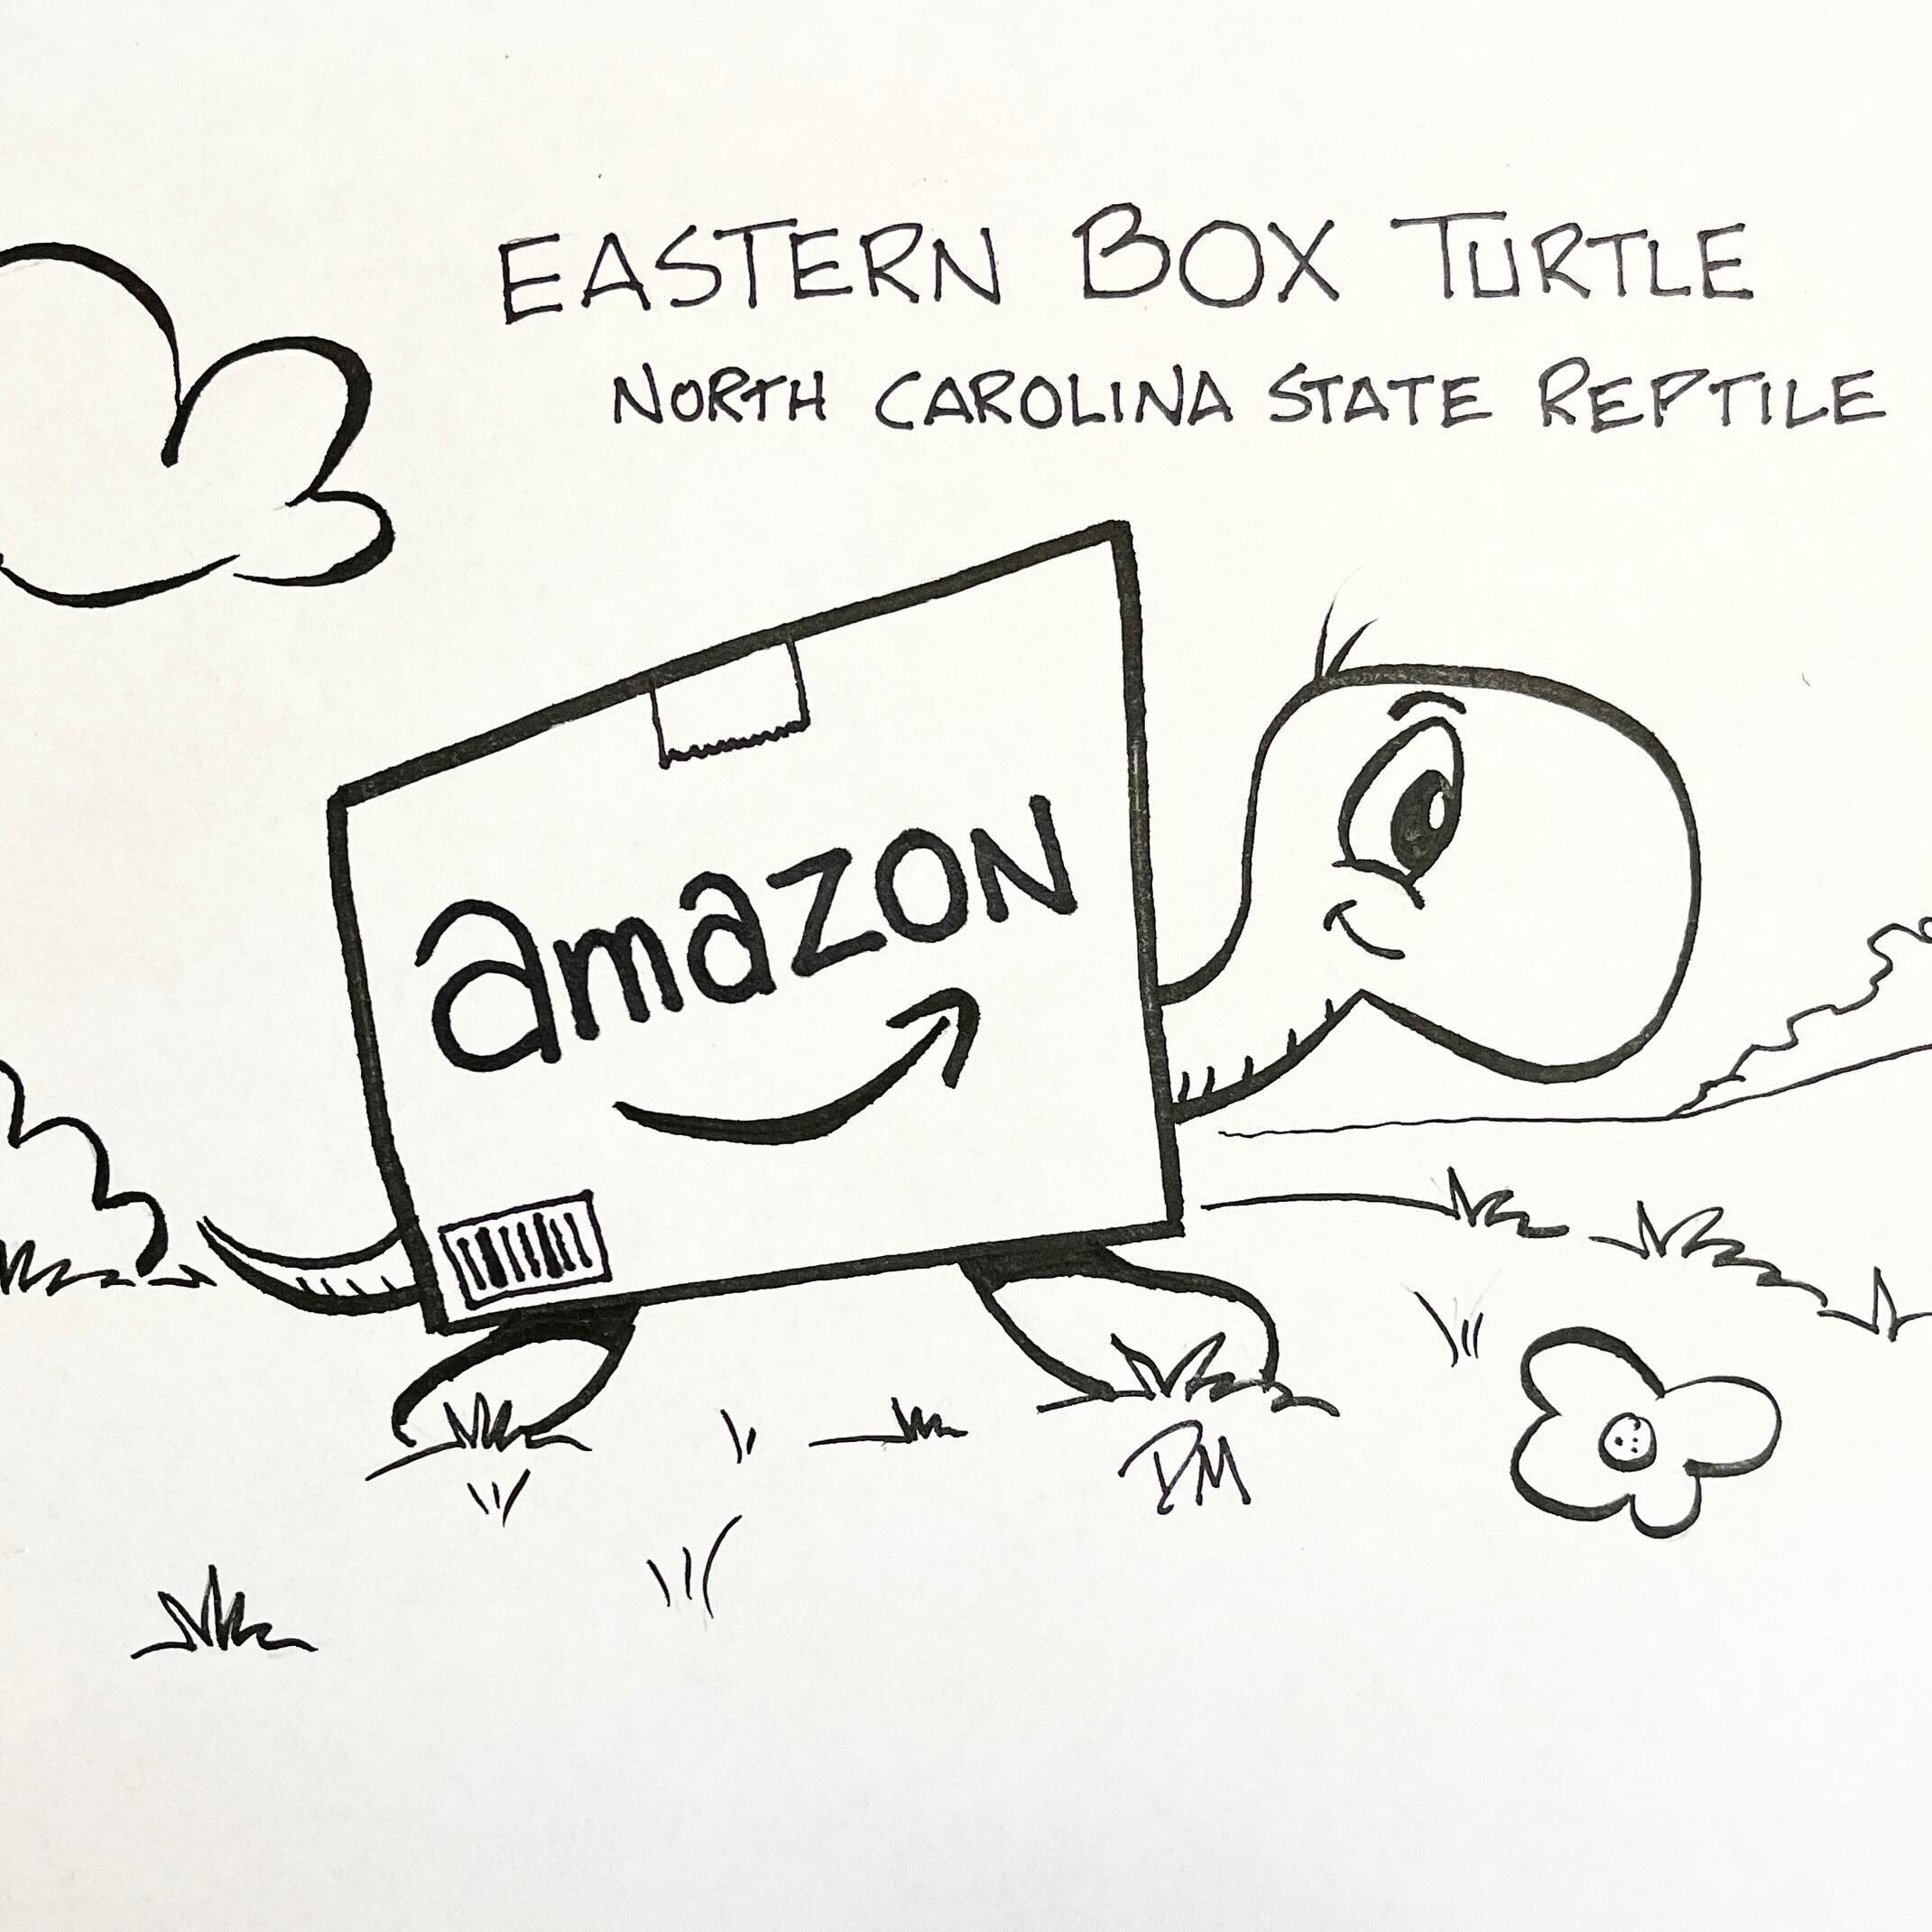 What&rsquo;s your favorite reptile? The Eastern Box Turtle is the state #reptile for #northcarolina. Yep, and they make excellent delivery drivers, though a bit slow!  I&rsquo;m making #crosscurricular #comics in #raleigh this week with fourth grader